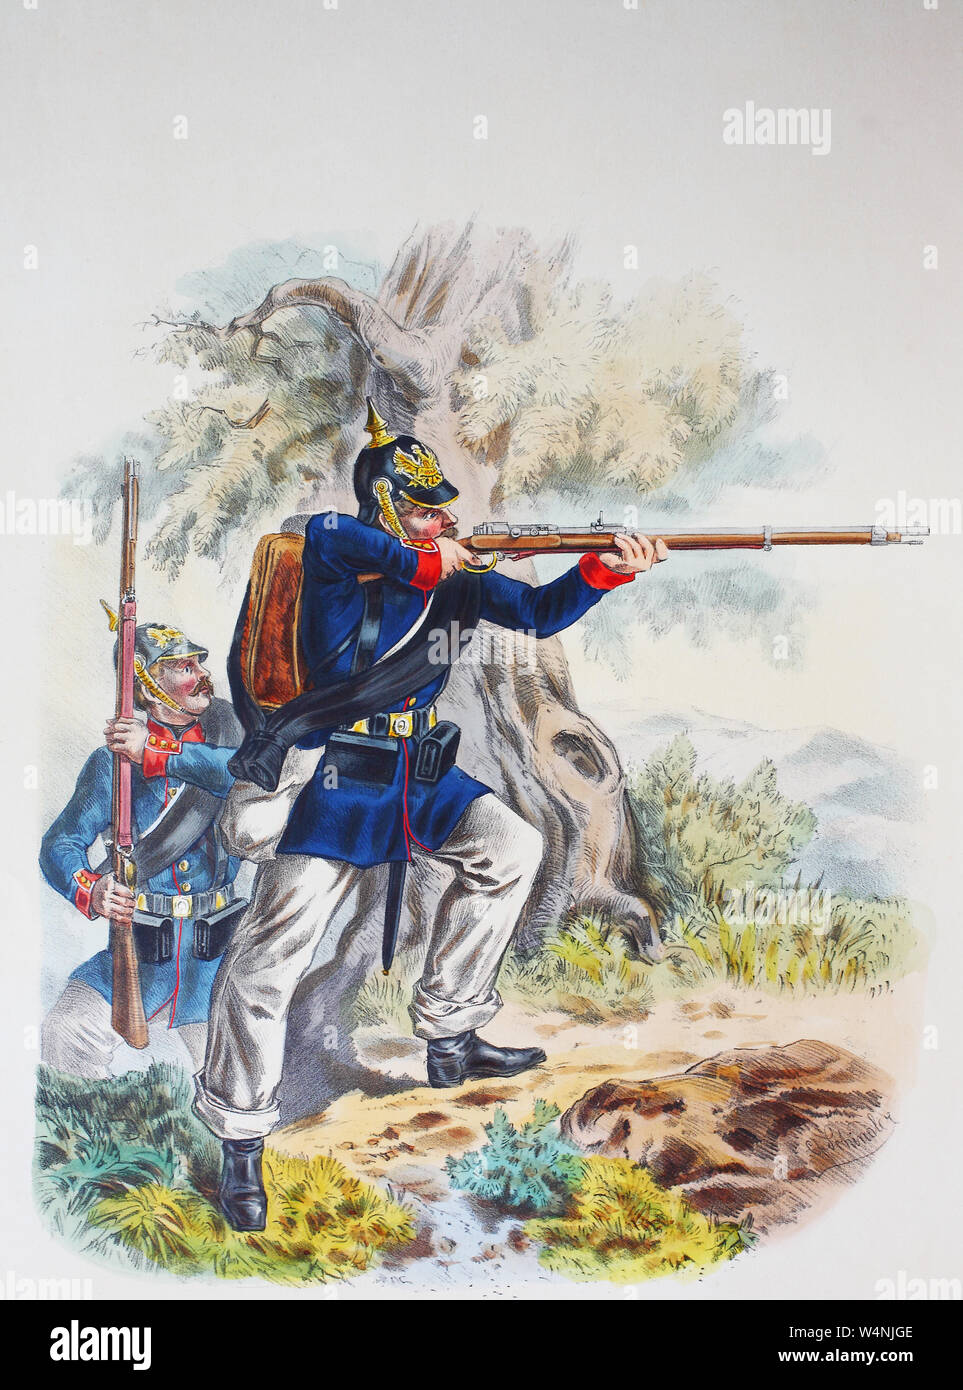 Royal Prussian Army, Guards Corps, Preußens Heer, preussische Garde, Pommersches Füsilier Regiment No. 34, Füsiliere, Digital improved reproduction of an illustration from the 19th century Stock Photo